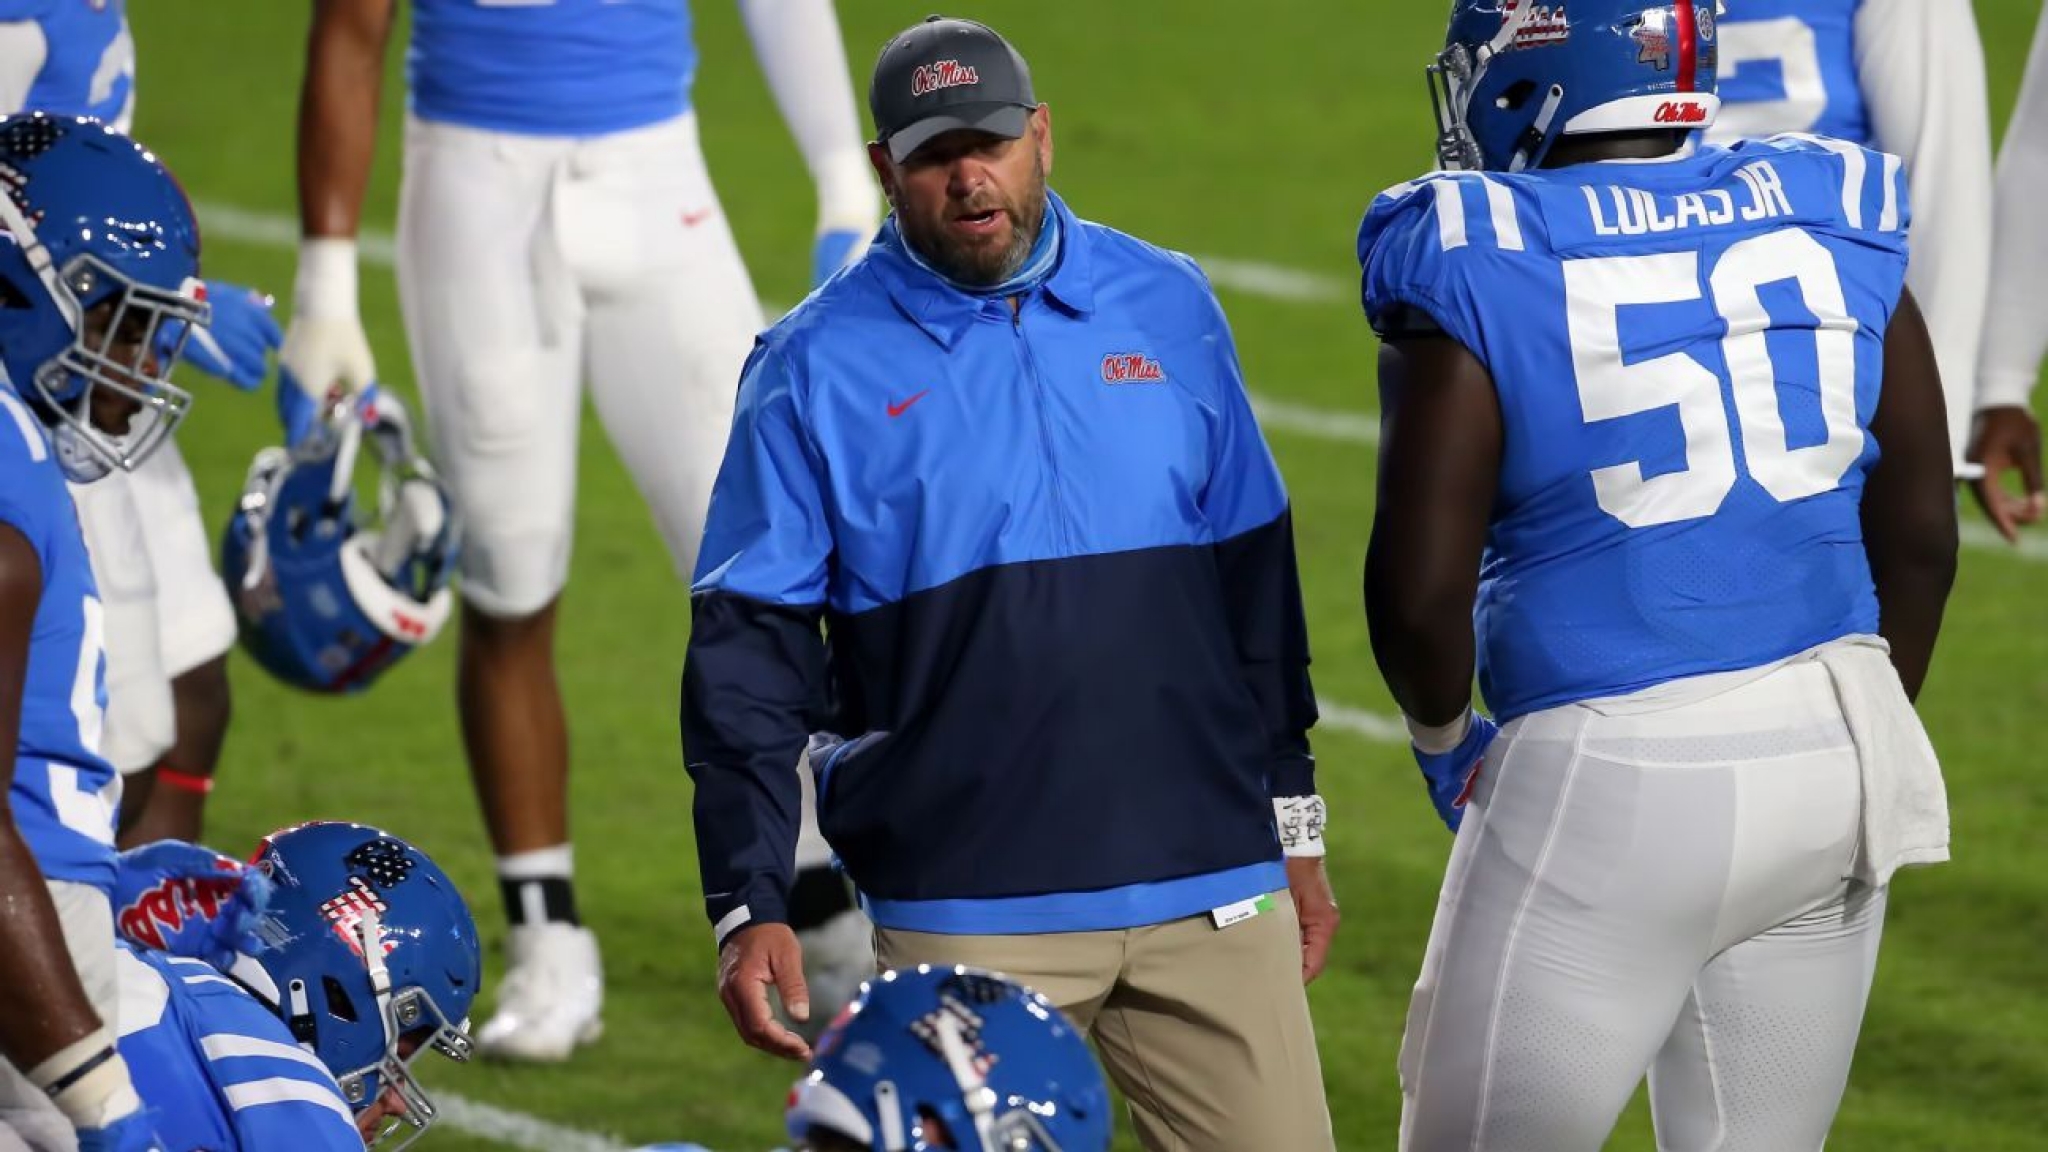 Ole Miss fires OL coach days after spring game